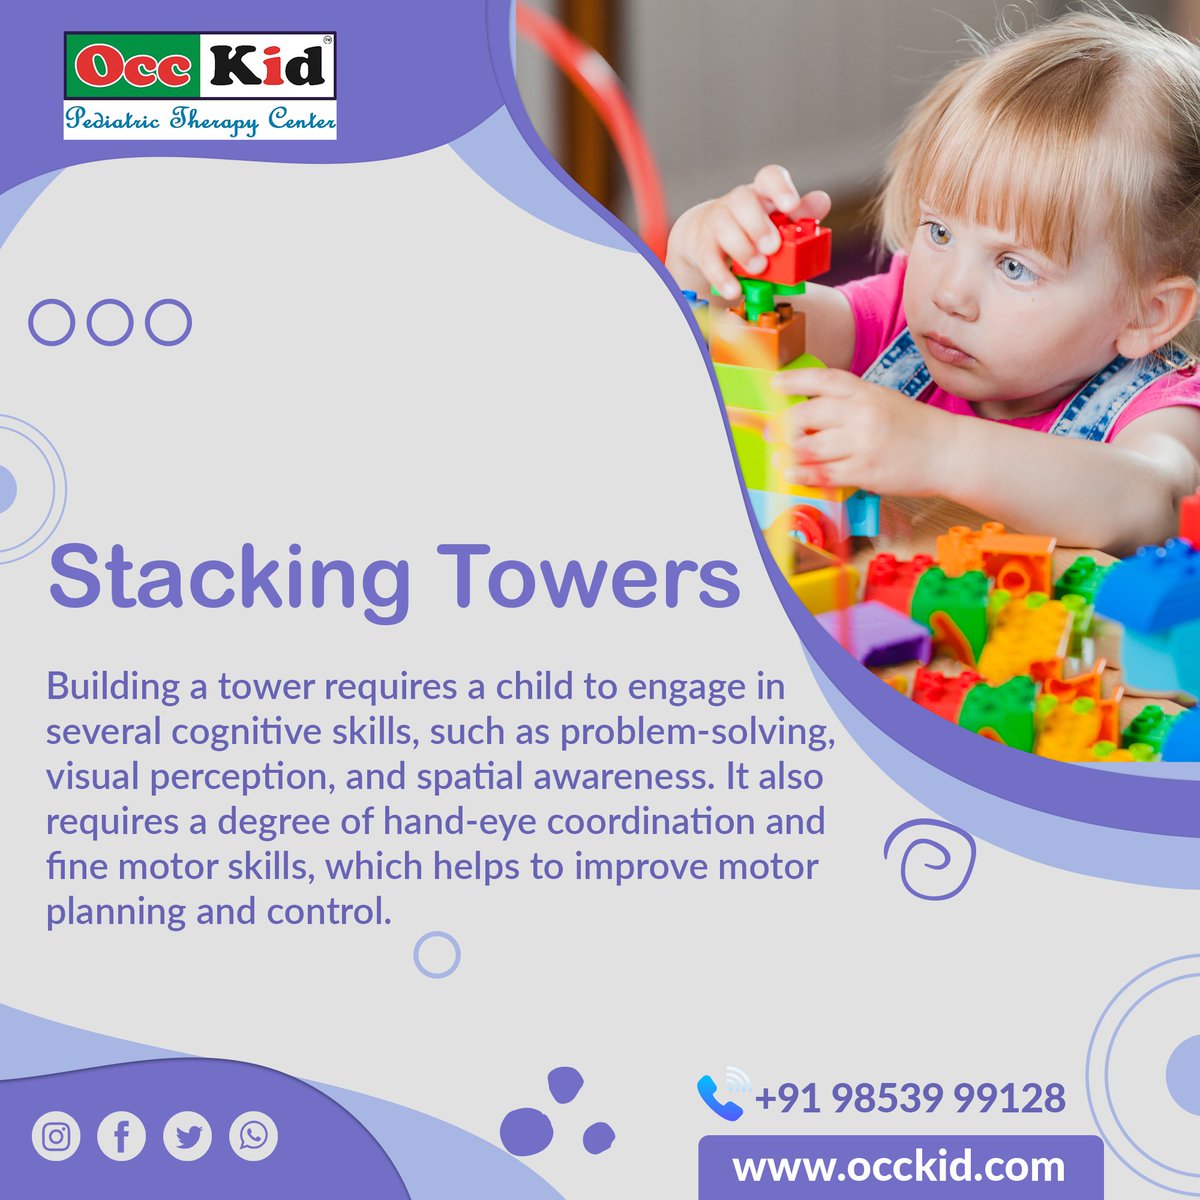 Stacking towers have a positive impact on the cognitive development of children! It can help improve their hand-eye coordination, spatial awareness, and problem-solving skills.

#Occkid #CognitiveDevelopment #OccupationalTherapy